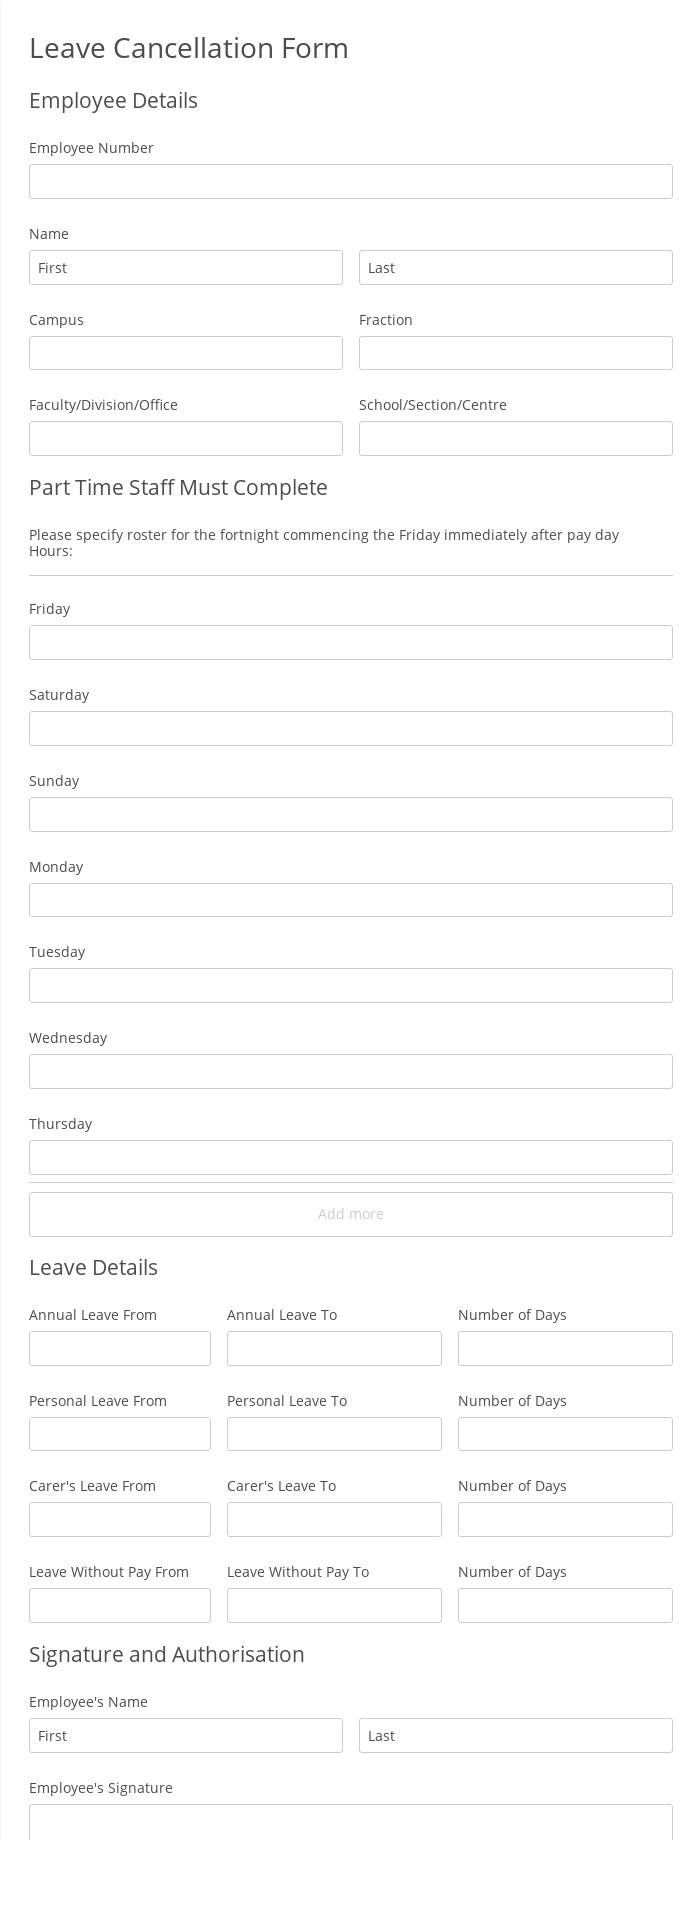 Leave Cancellation Form Template 123 Form Builder